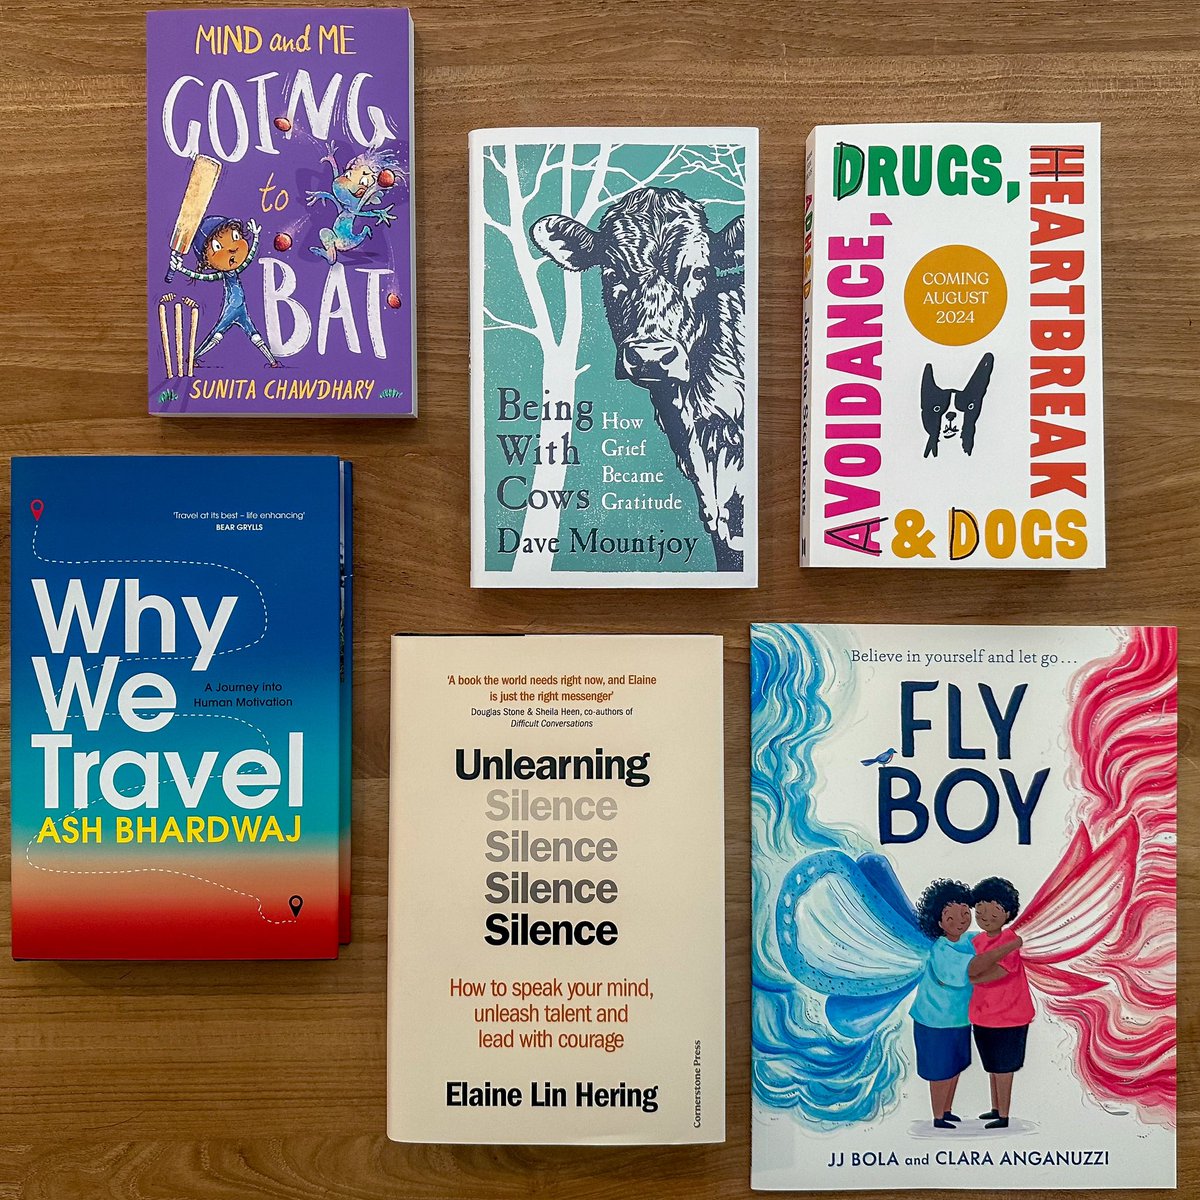 For #MentalHealthAwareness week we’ve been showcasing books which delve into all things mental health and wellbeing related with topics including grief, anxiety and trauma, to the joys of mindfulness and travel. Each story has offered honesty, insight and hope ❤️👏